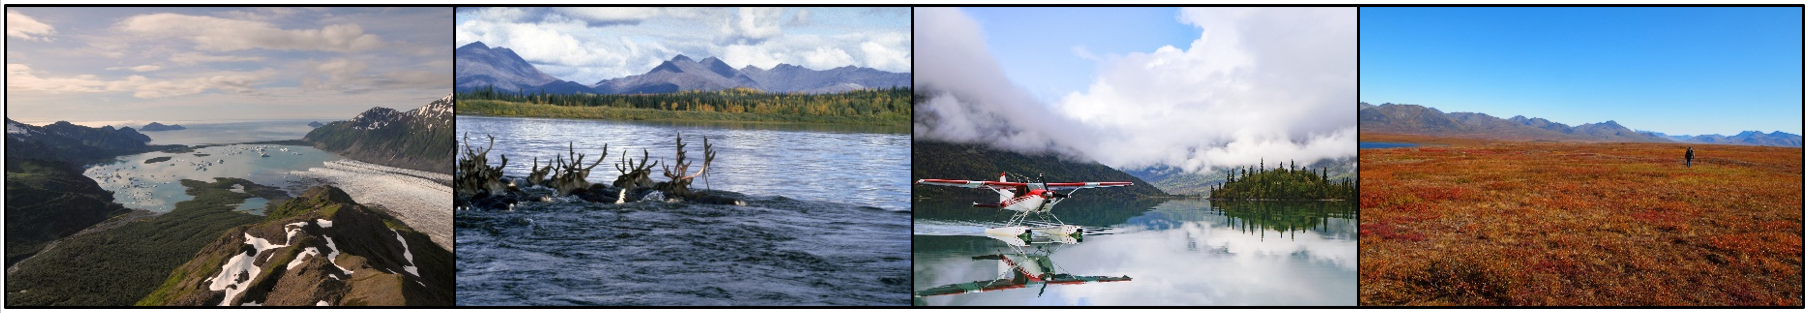 Row of photos including a glacier melting into the ocean; caribou crossing a river; float plane on a river; and a hiker in a prairie